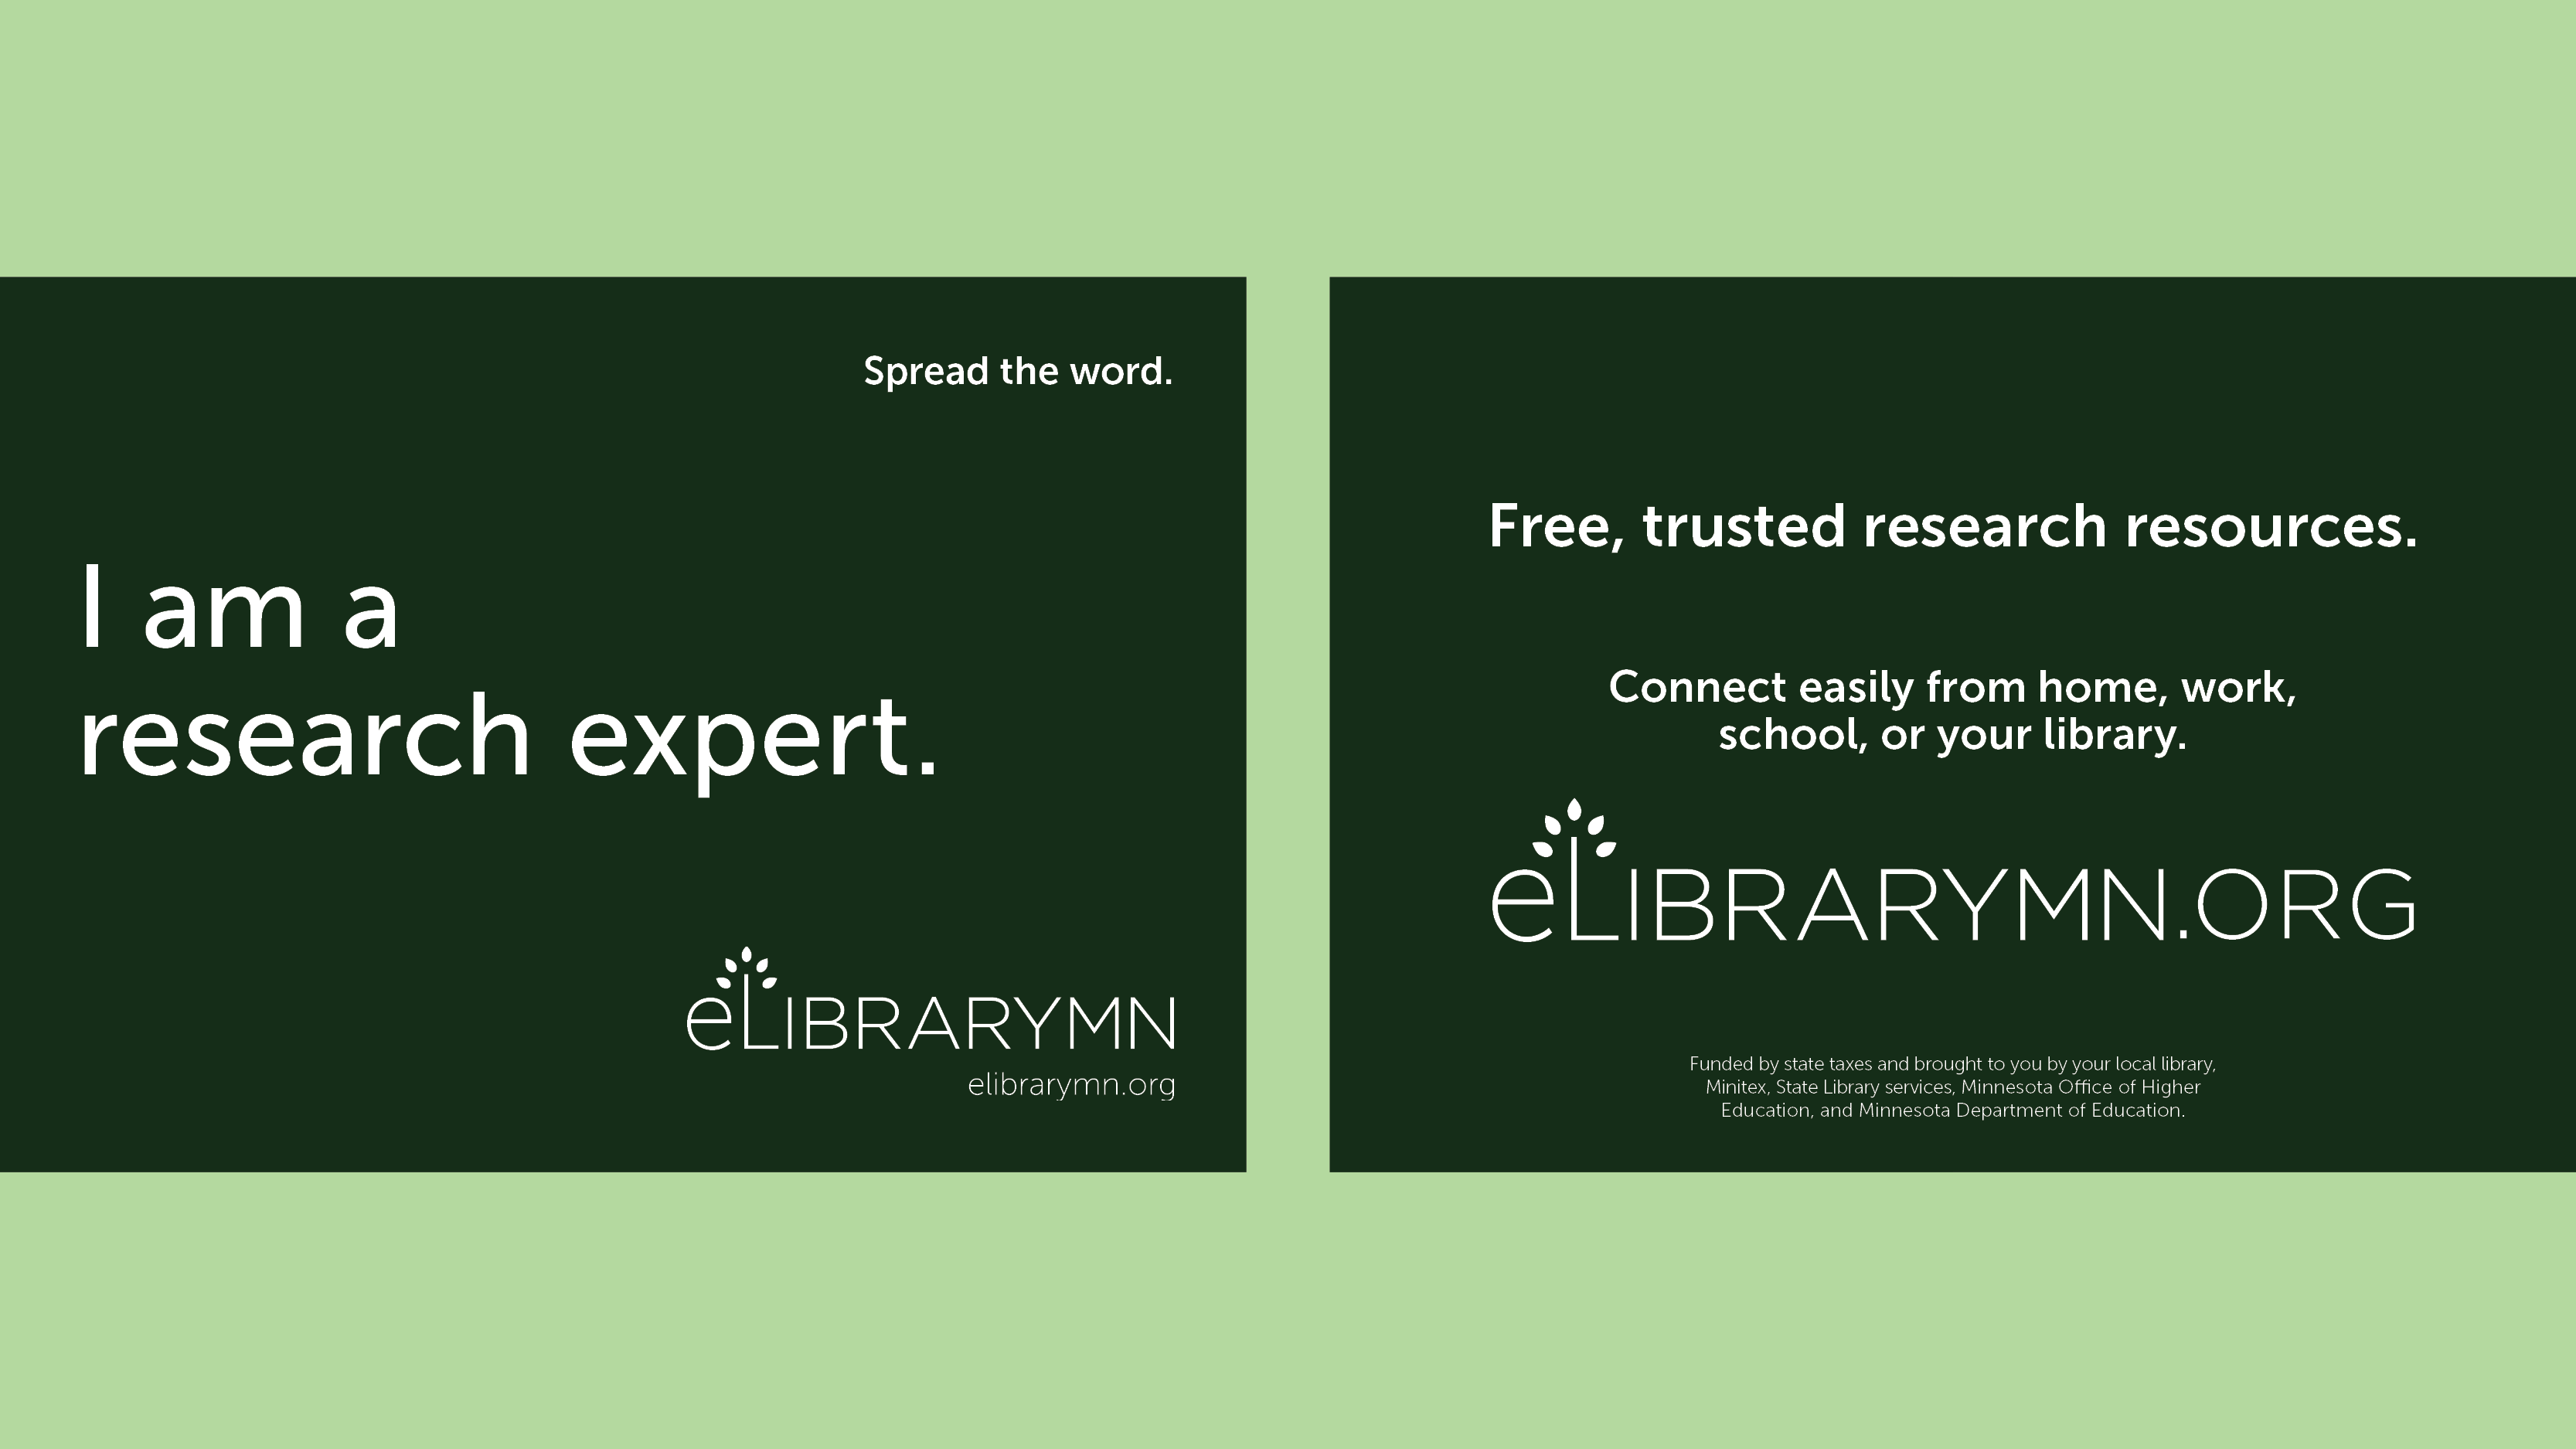 Preview of ELM's "I am a research expert postcard" promoting it's resources.